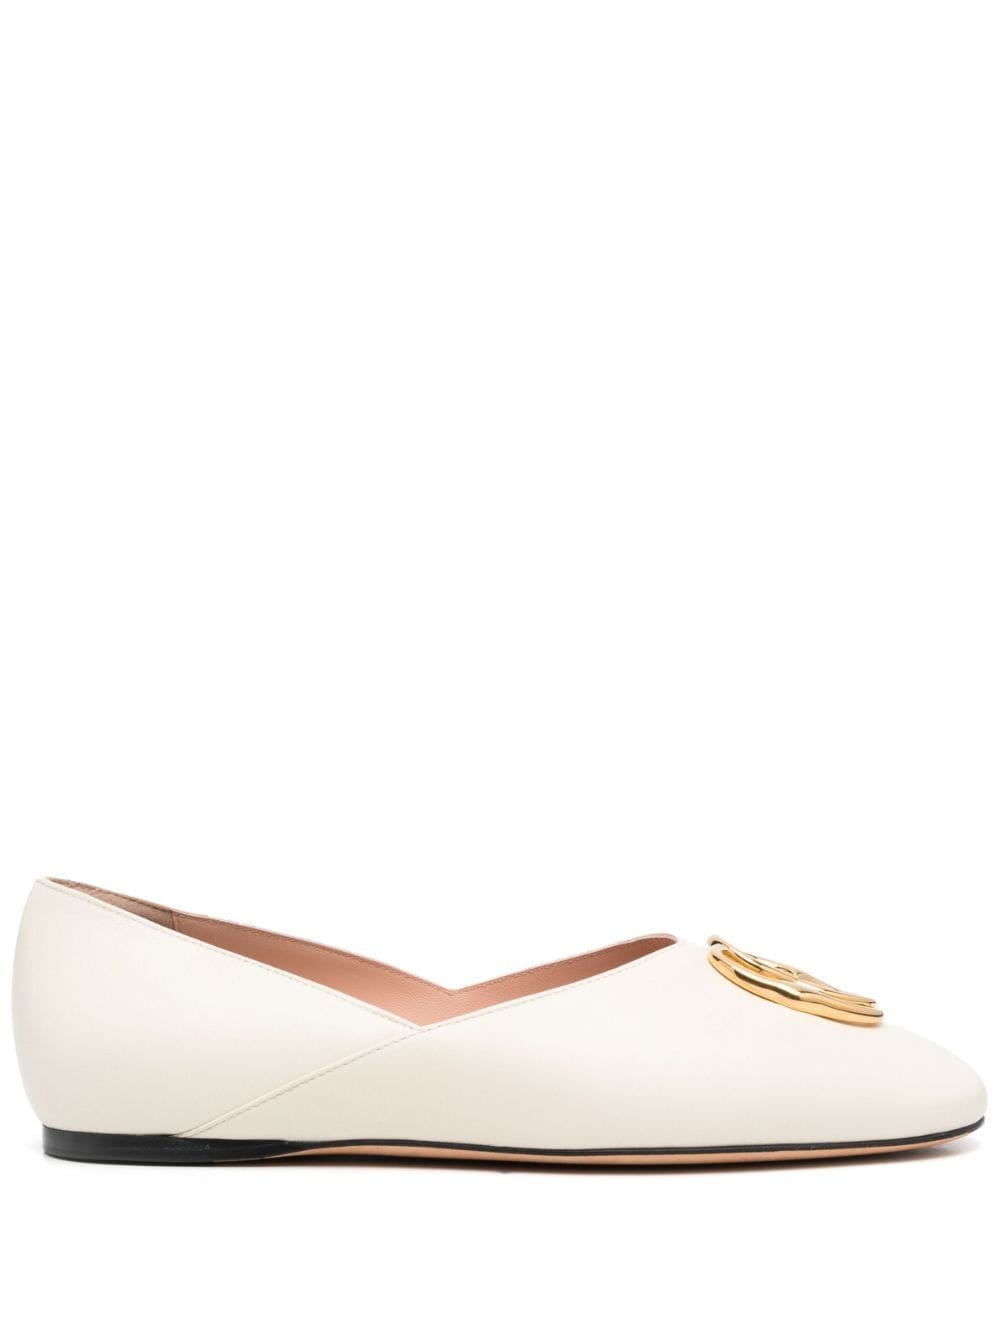 Bally Gerry Leather Ballerina Shoes In White